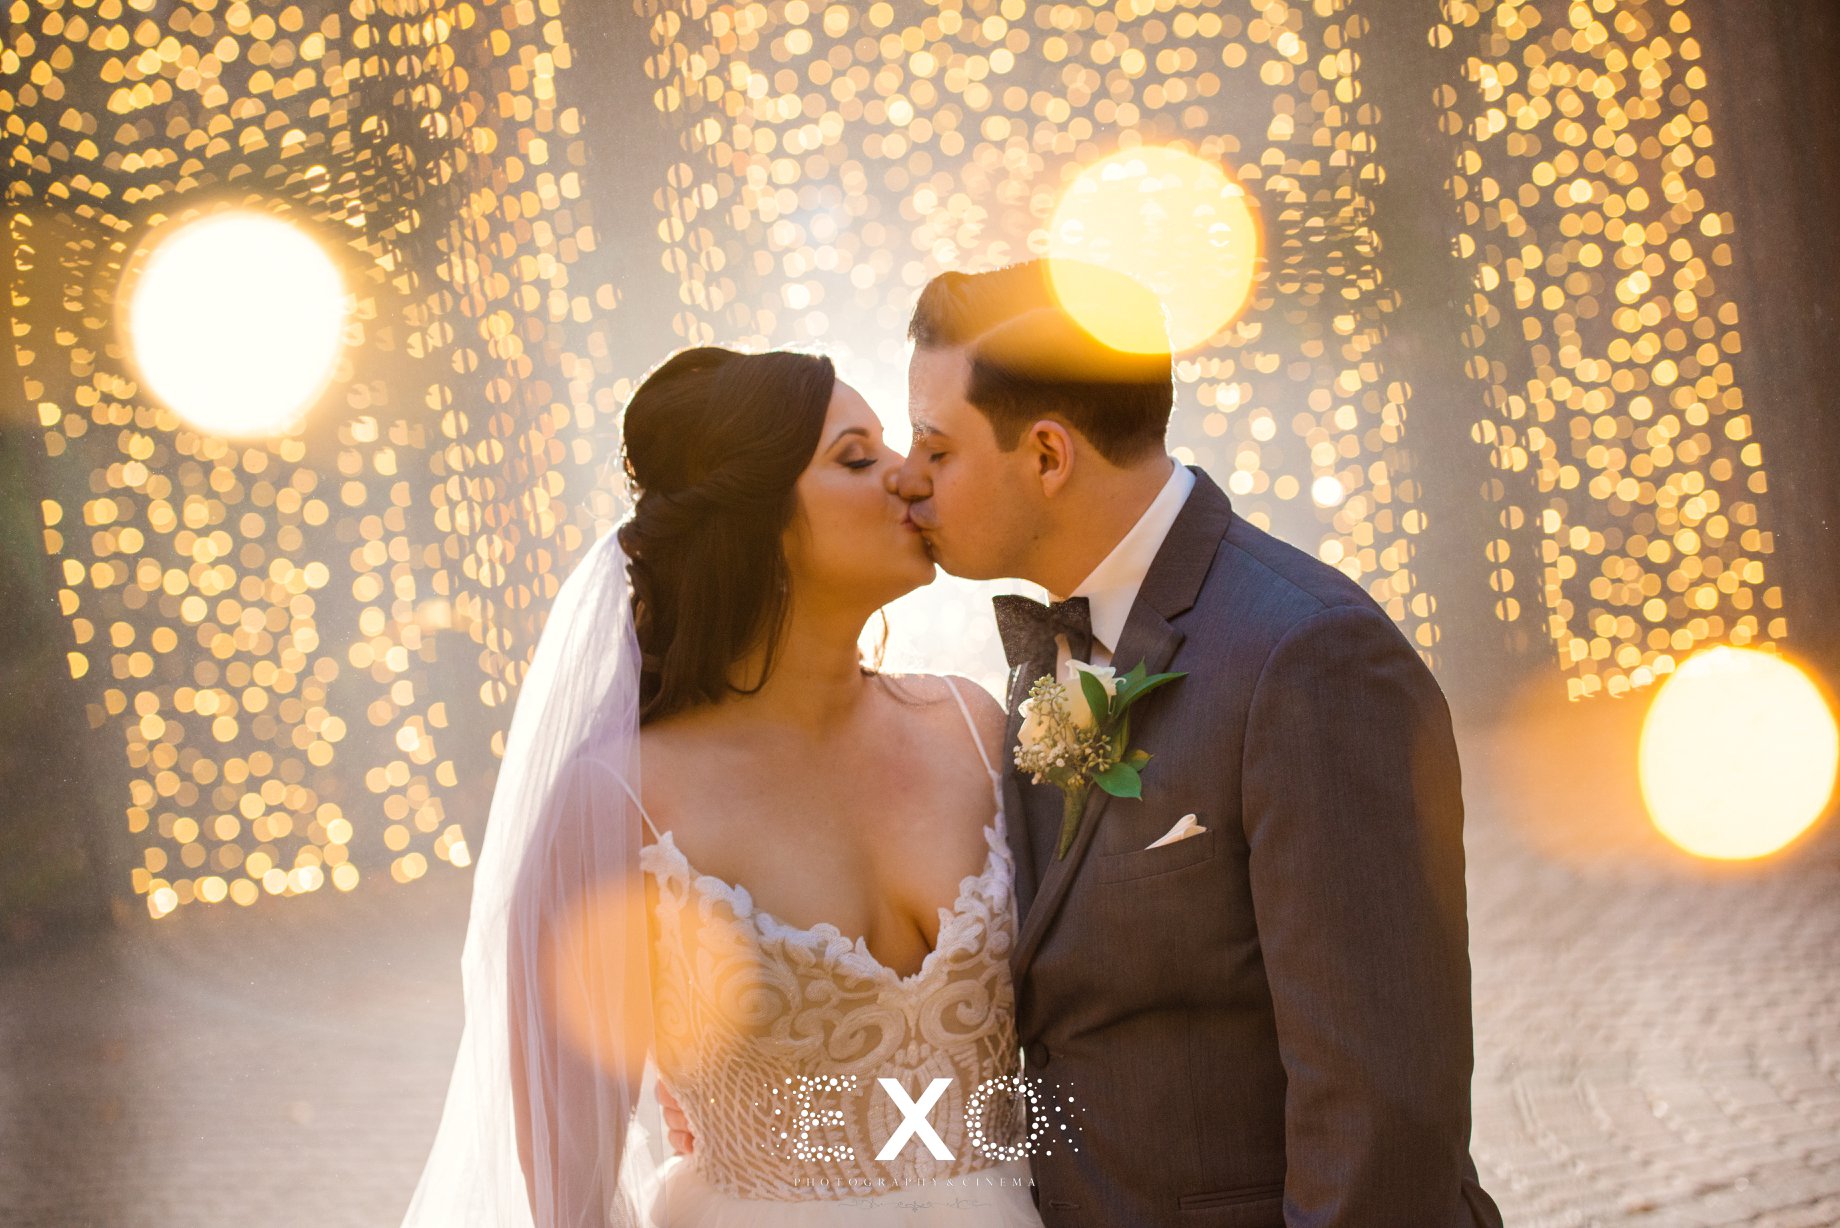 Bride and groom kissing with string light behind them